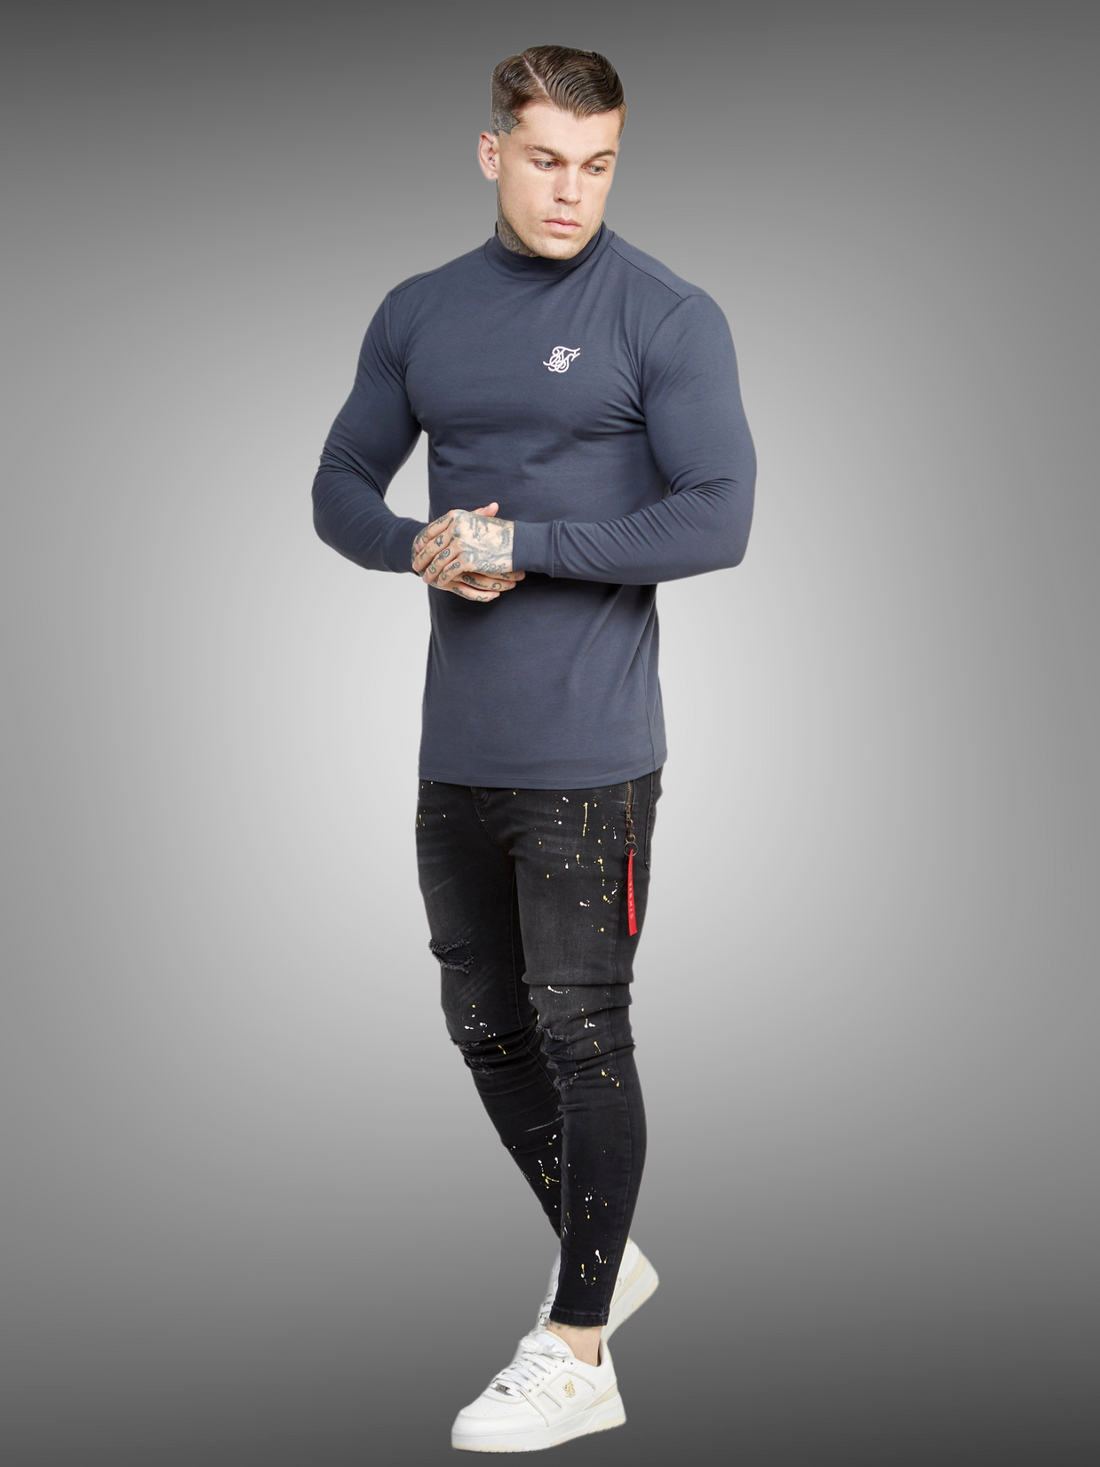 SikSilk - Black Long Sleeve High Neck Muscle Fit T-Shirt - Stayin